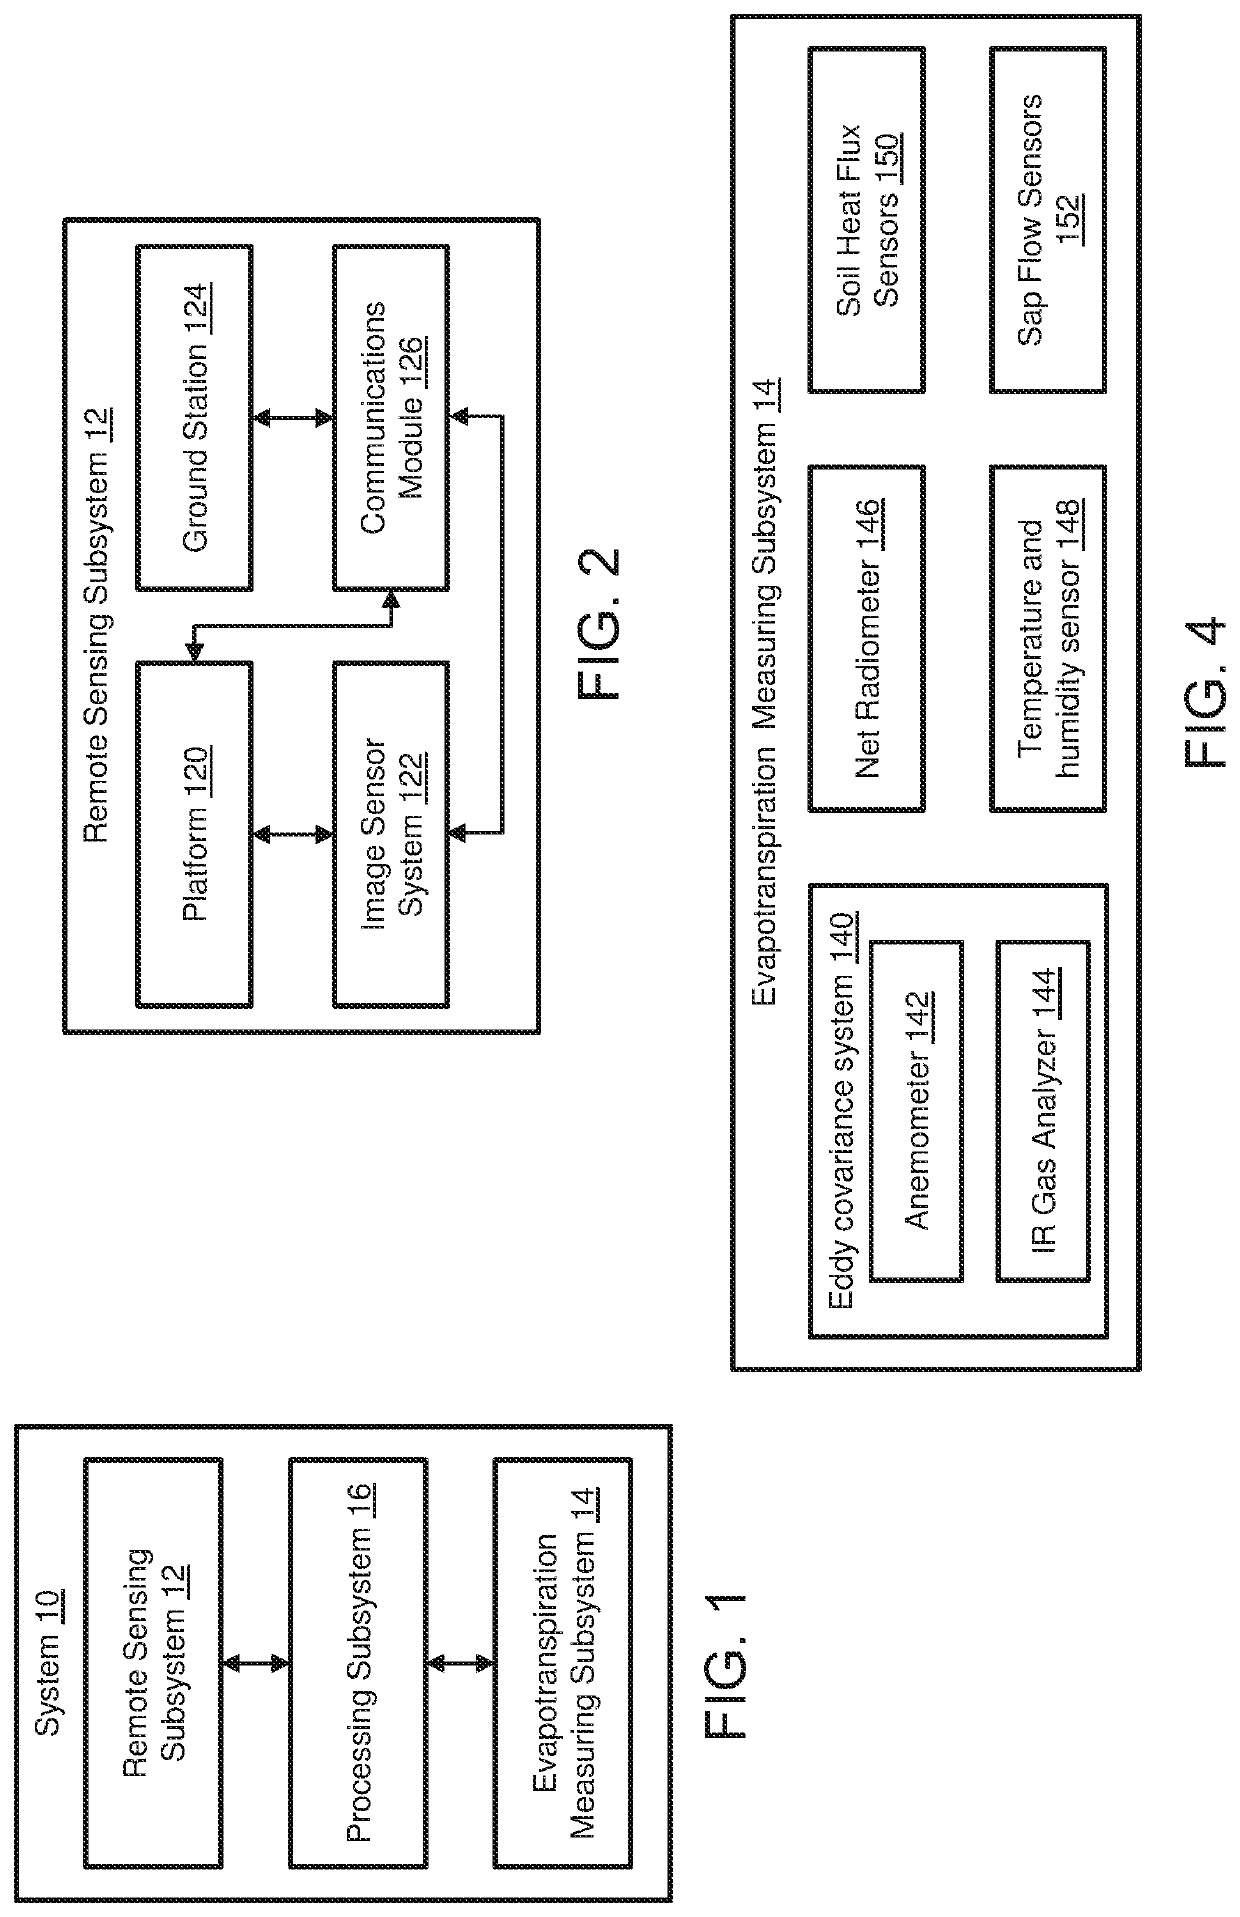 Method and system for estimating crop coefficient and evapotranspiration of crops based on remote sensing